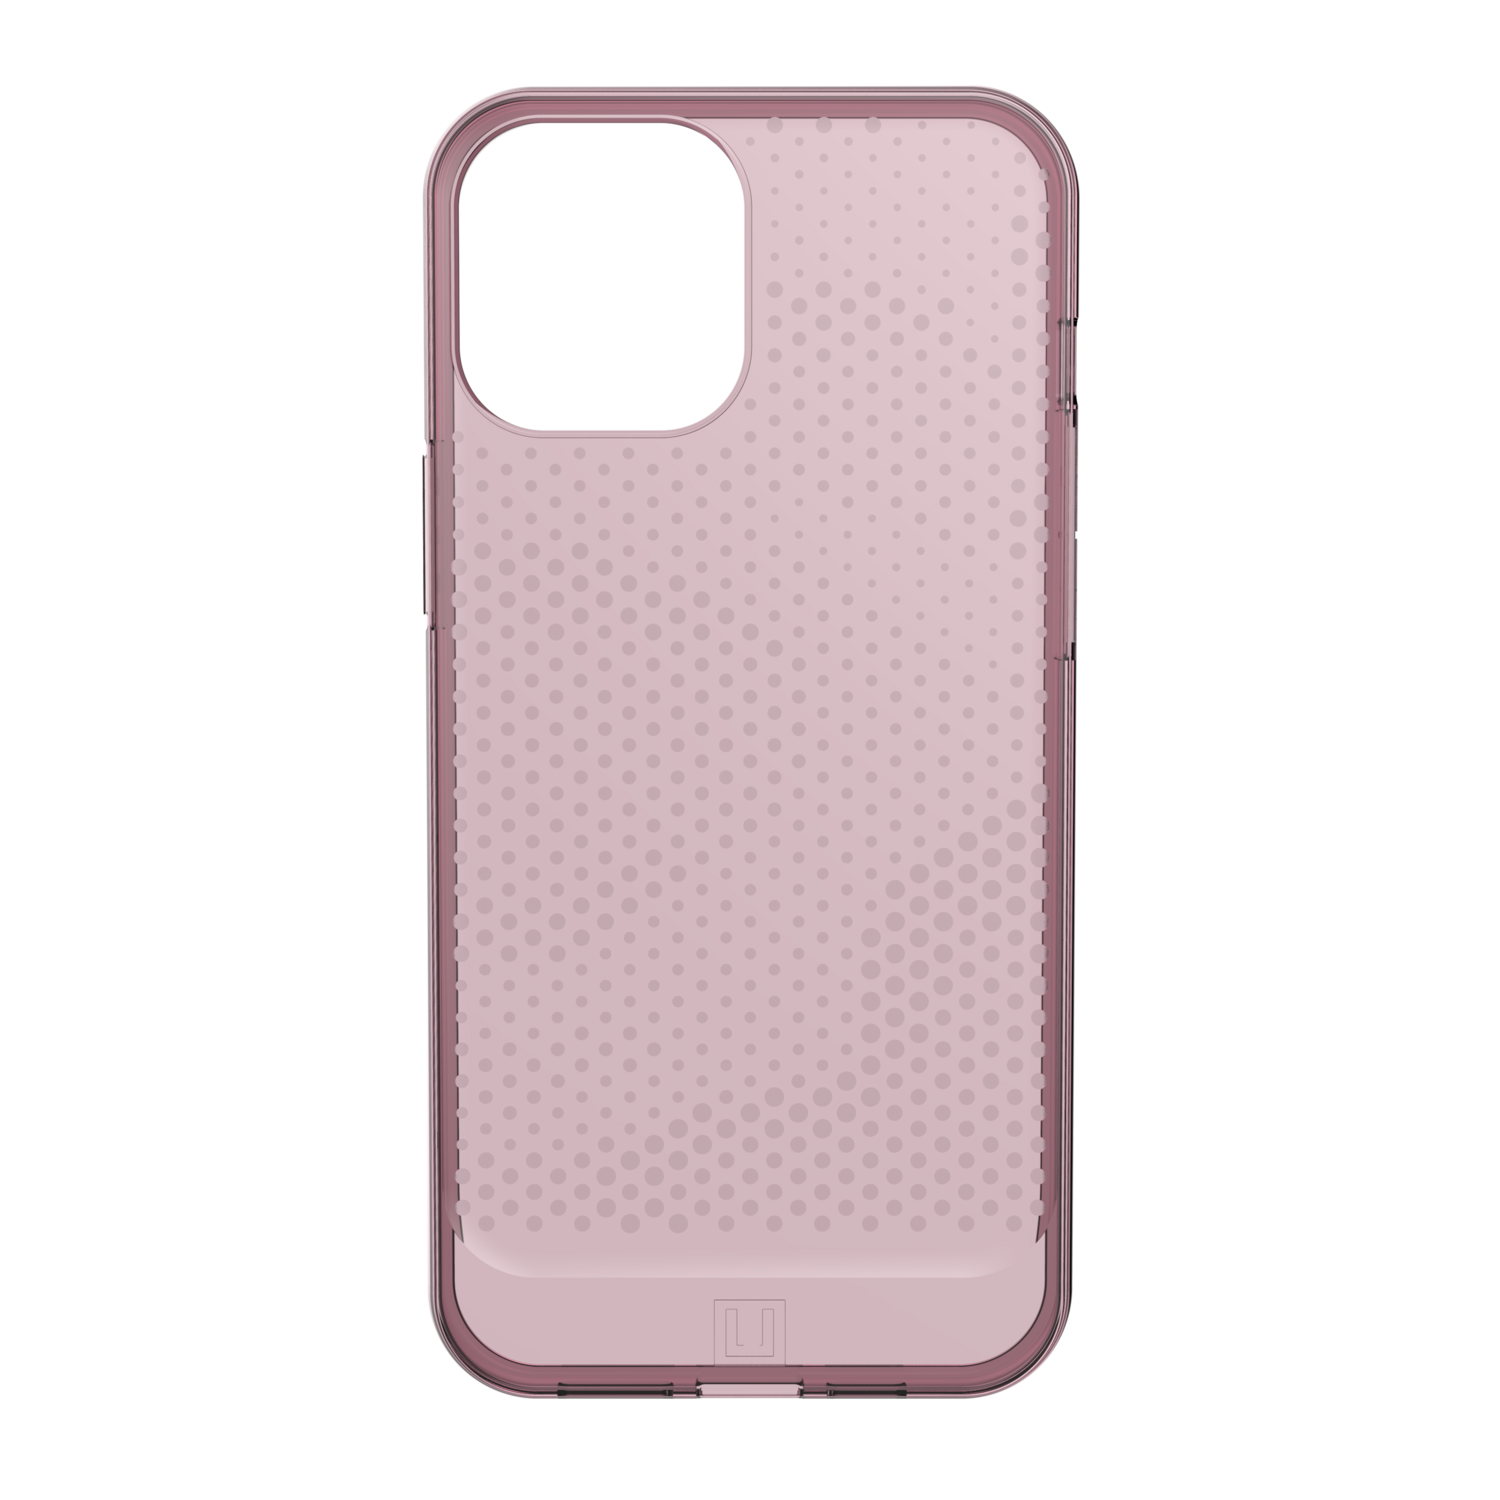 U by UAG iPhone 12 Pro Max Lucent Case, Dusty Rose